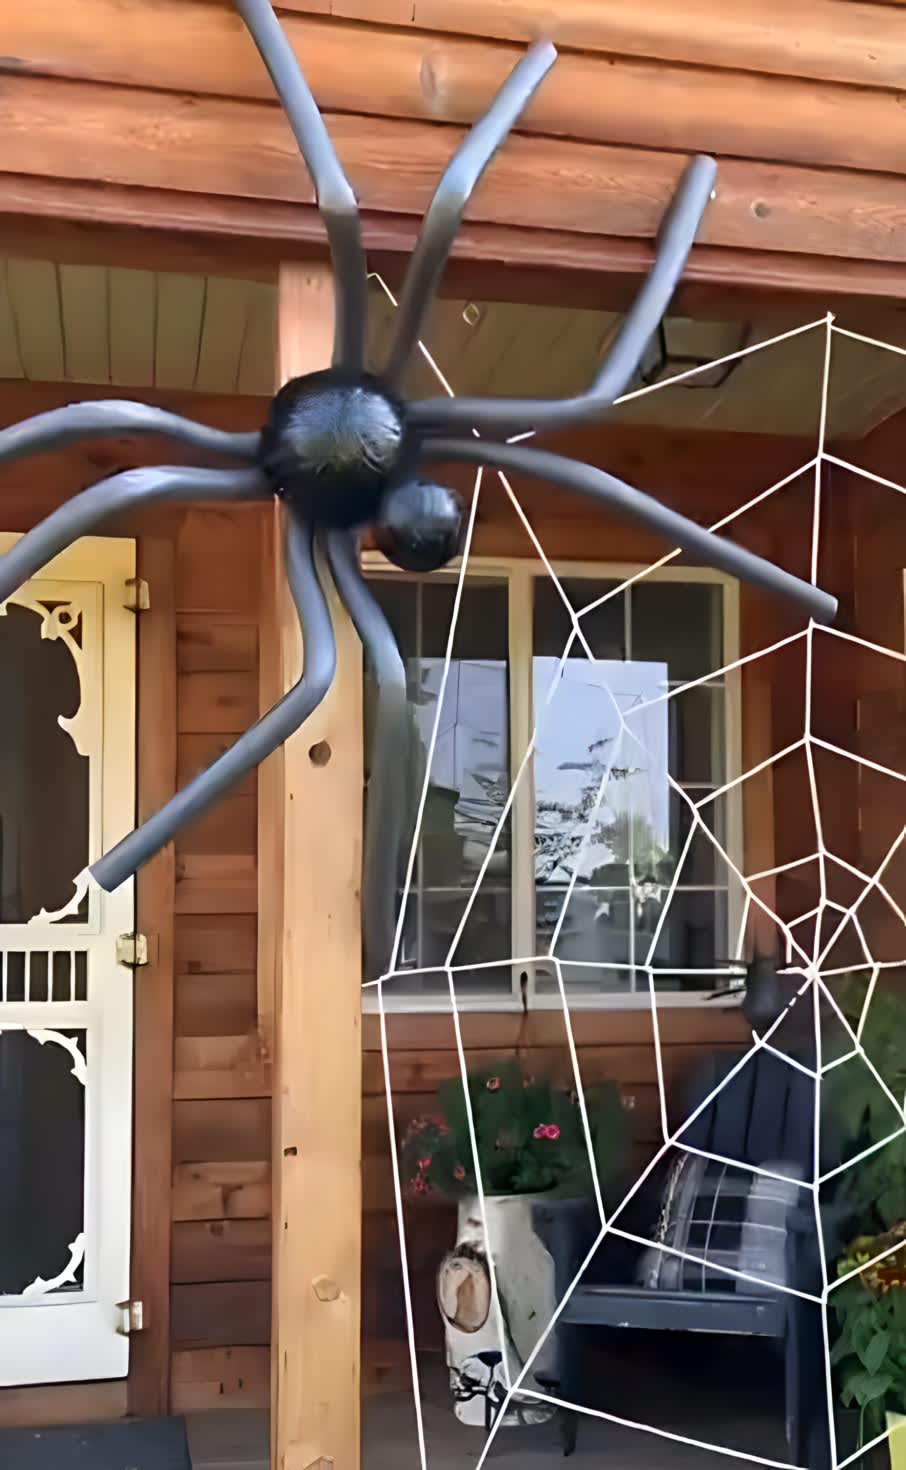 A spider Halloween decoration made from pool noodles